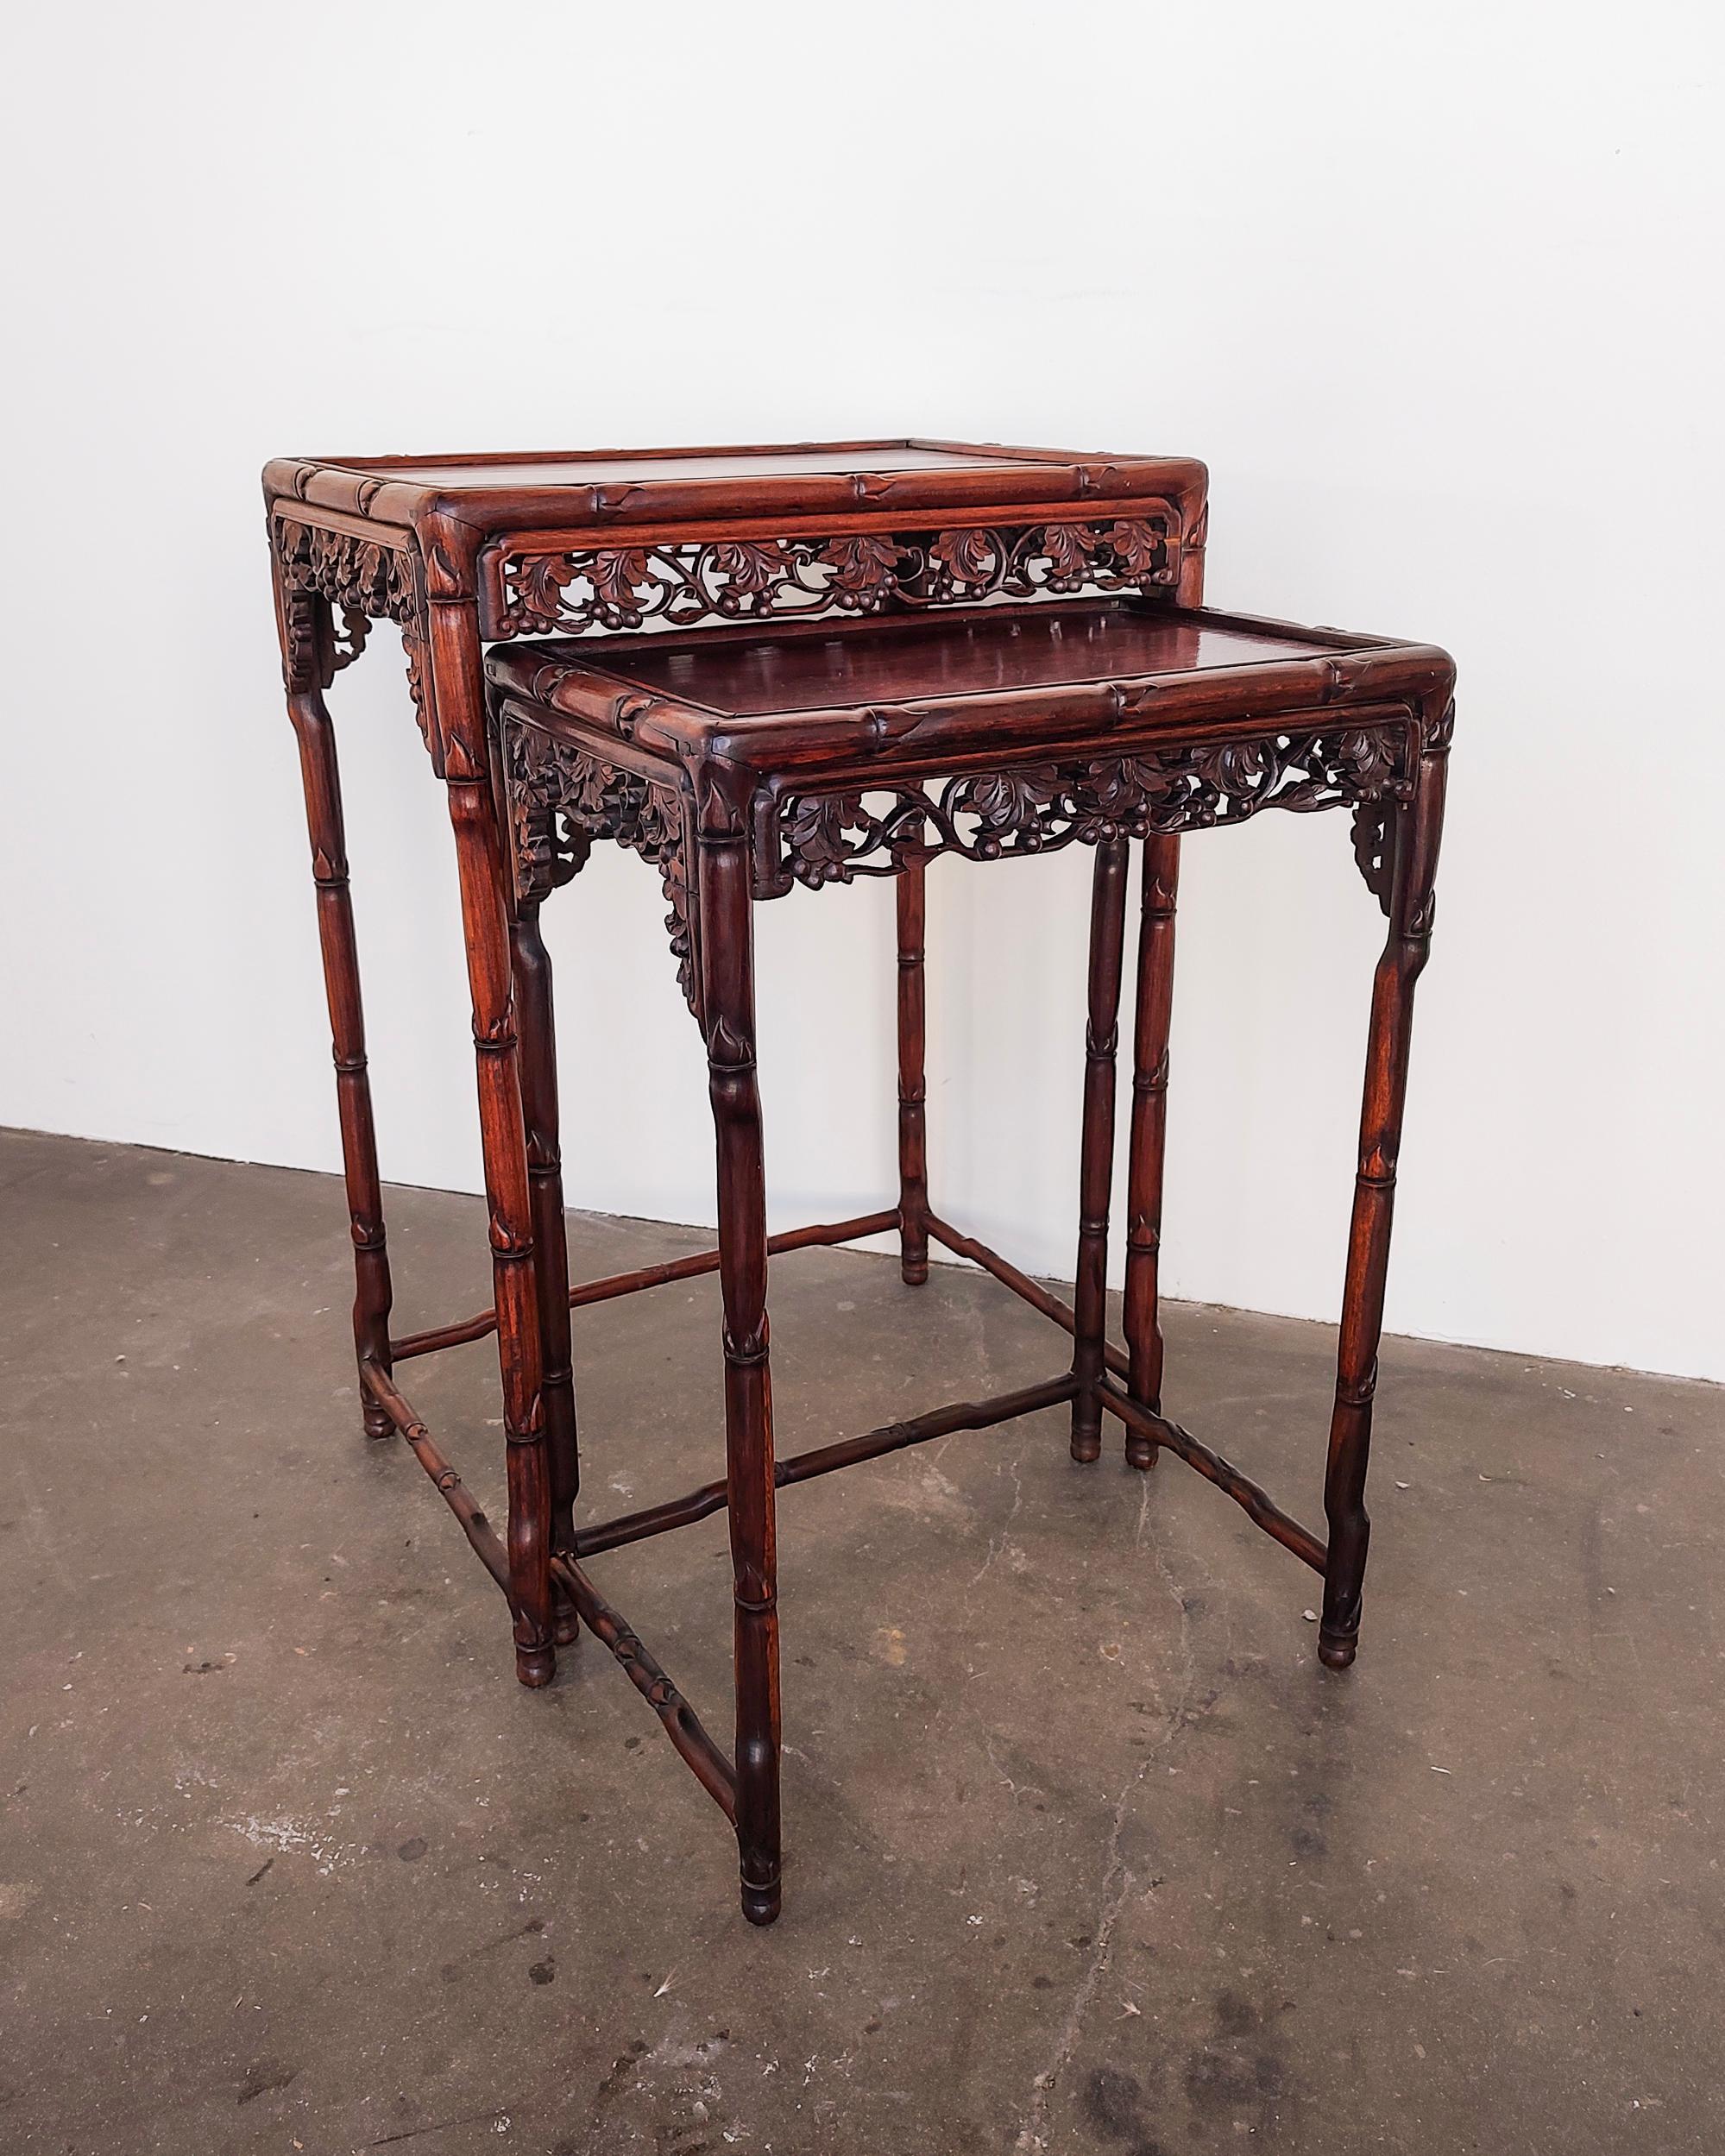 Pair of Chinese rosewood nesting tables circa late 19th century. Intricate bamboo and floral carvings and delicate solid rosewood legs. Overall great original condition, some light wear present, area of discoloration on the top of the larger